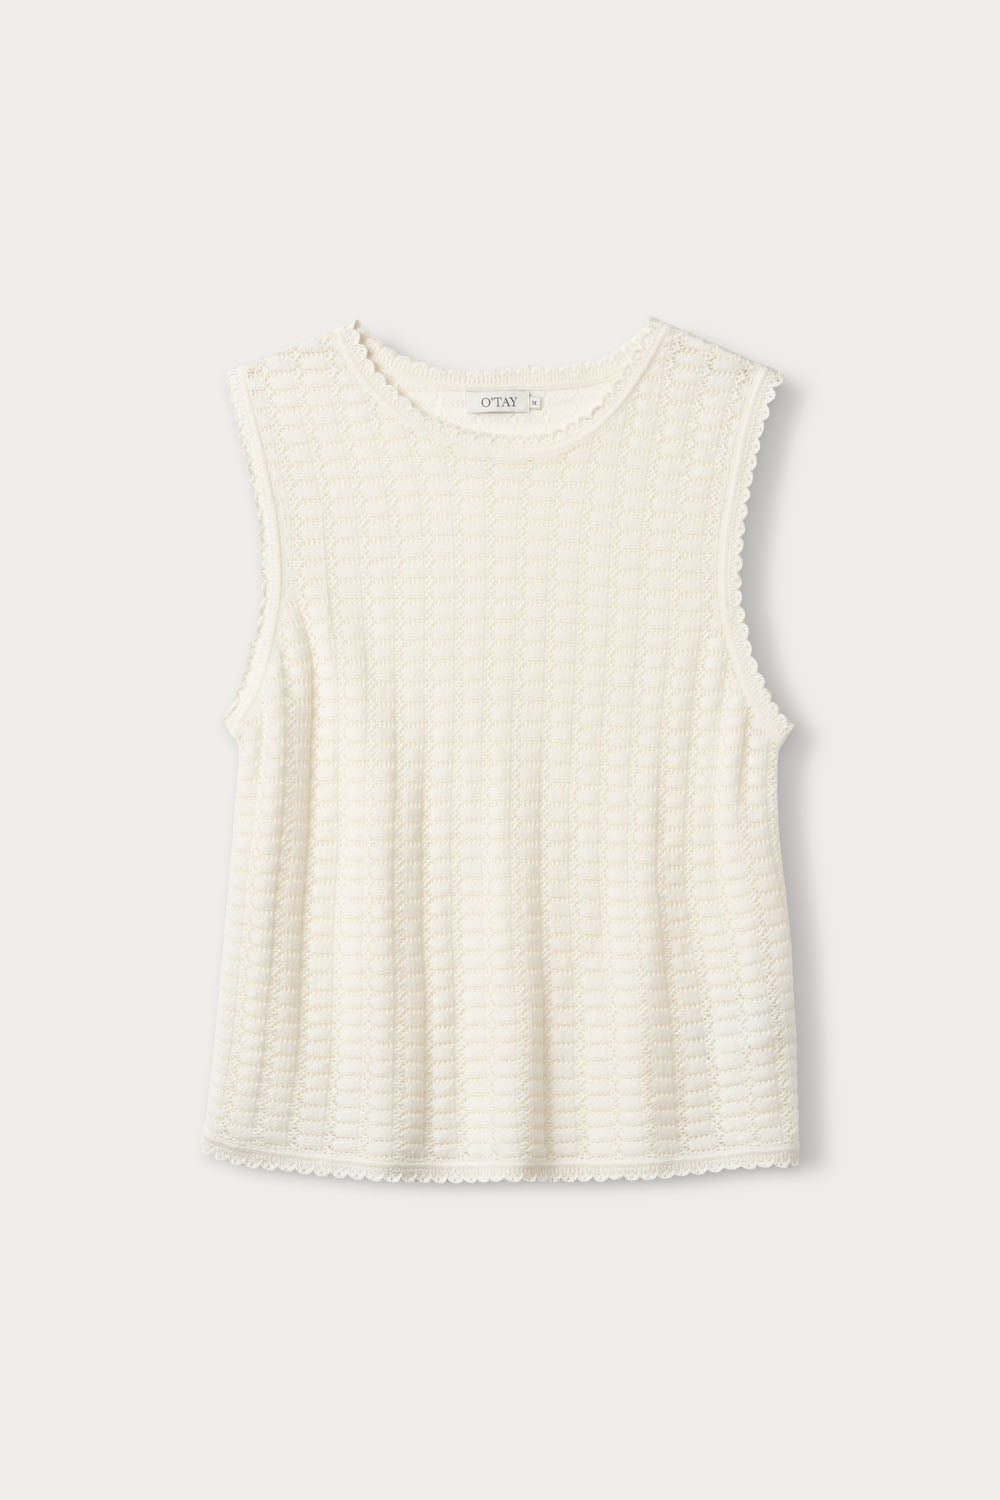 O'TAY Gabrielle Top Tops Off White